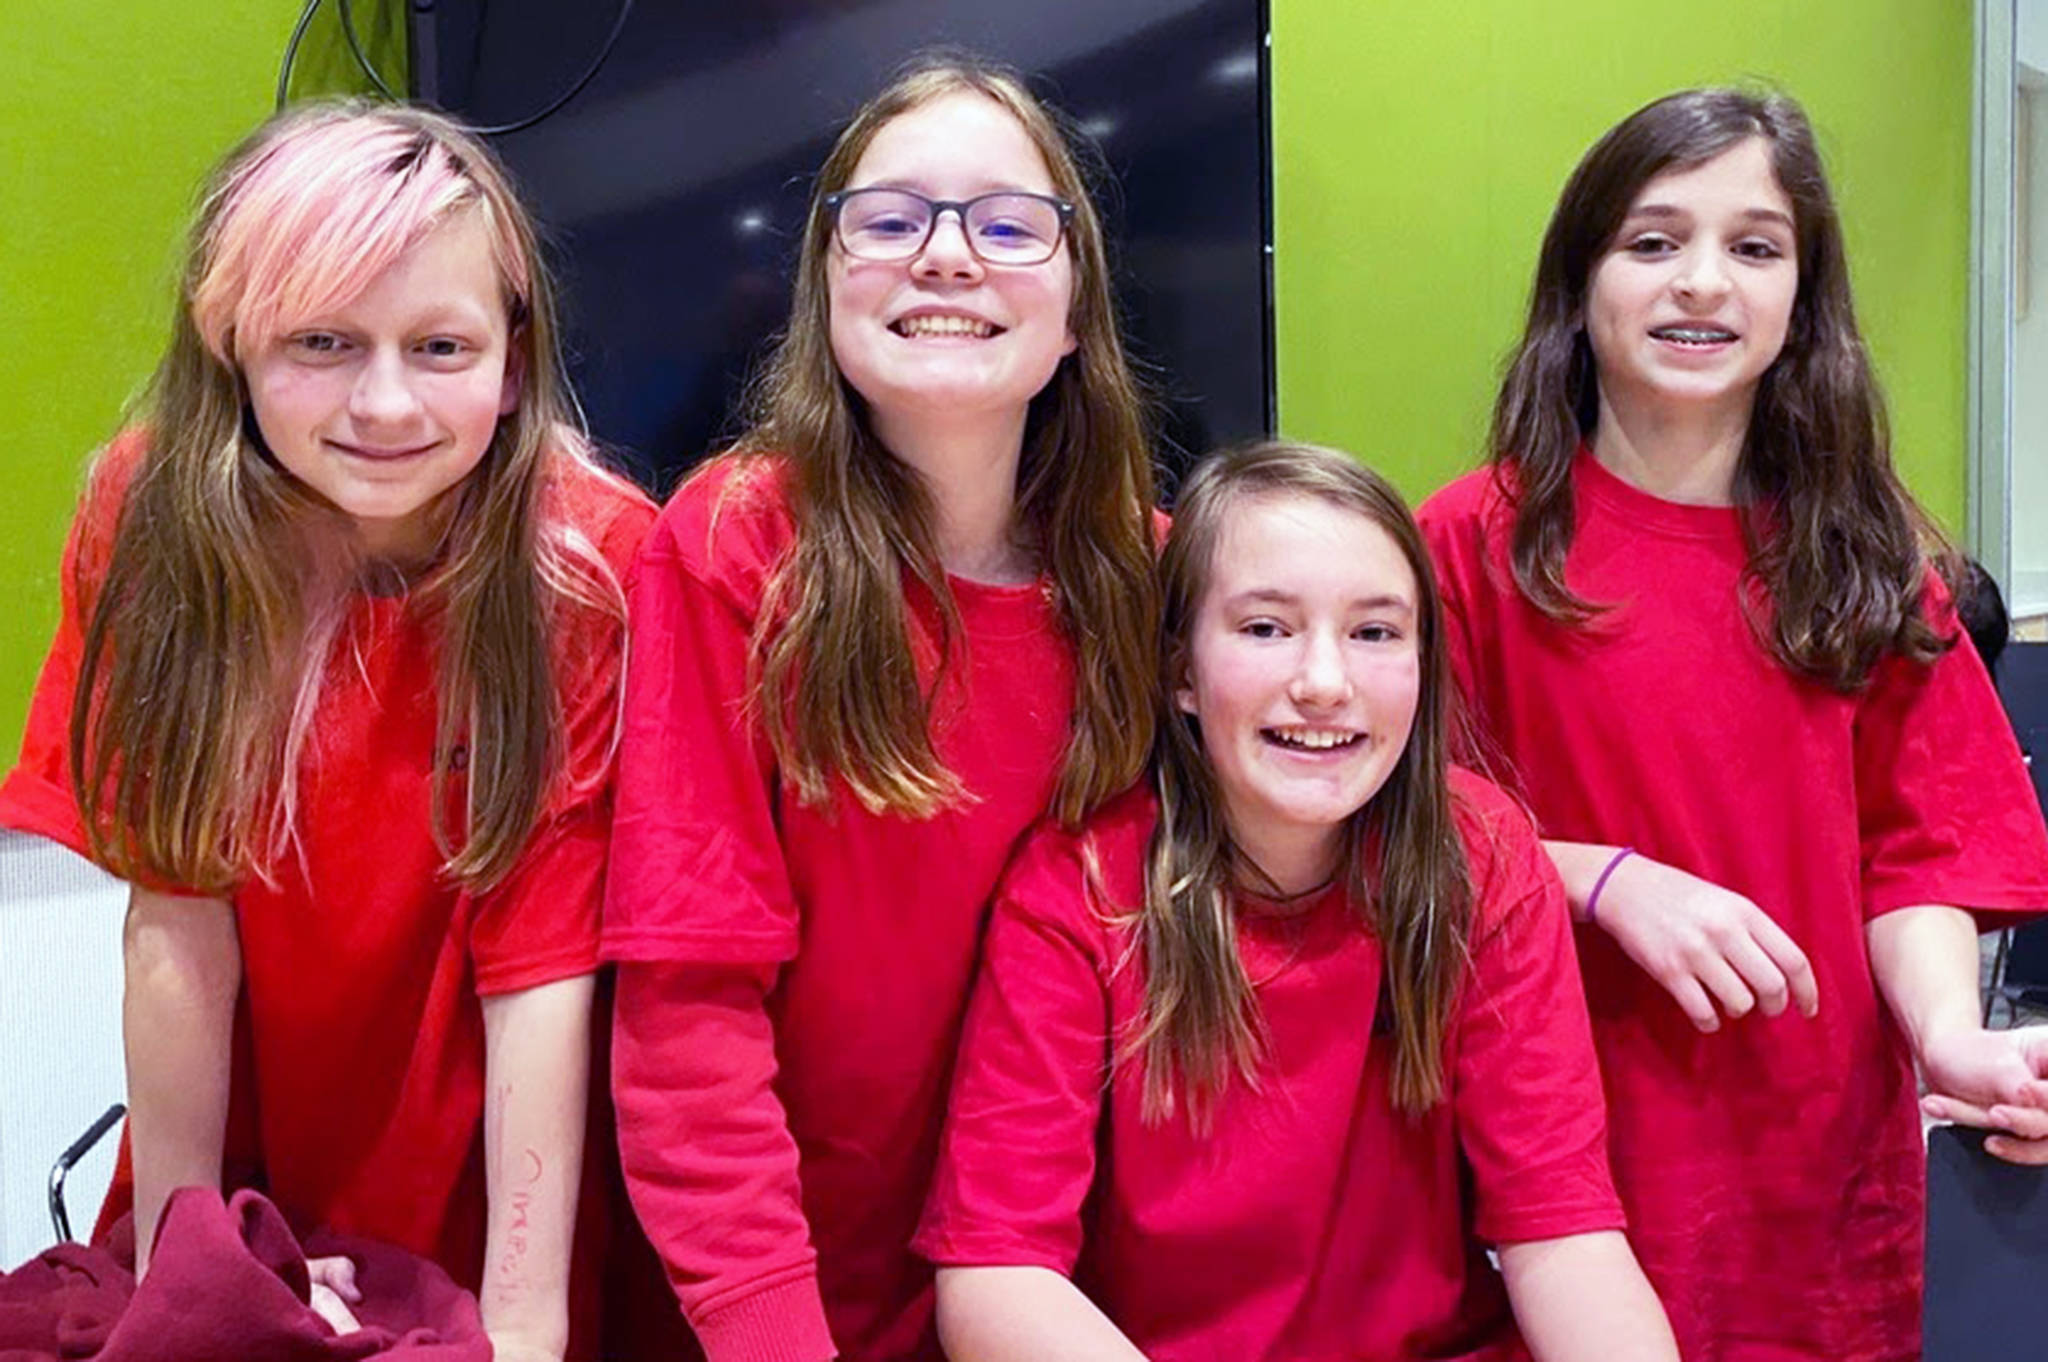 Members of the Floyd Dryden Middle School Battle of the Books team Amelia Walker, Della Mearig, Miranda Stichert and Anberlin Tingey earned a perfect score at Wednesday’s Battle of the Books battle at the Mendenhall Valley Public library. (Courtesy photo)